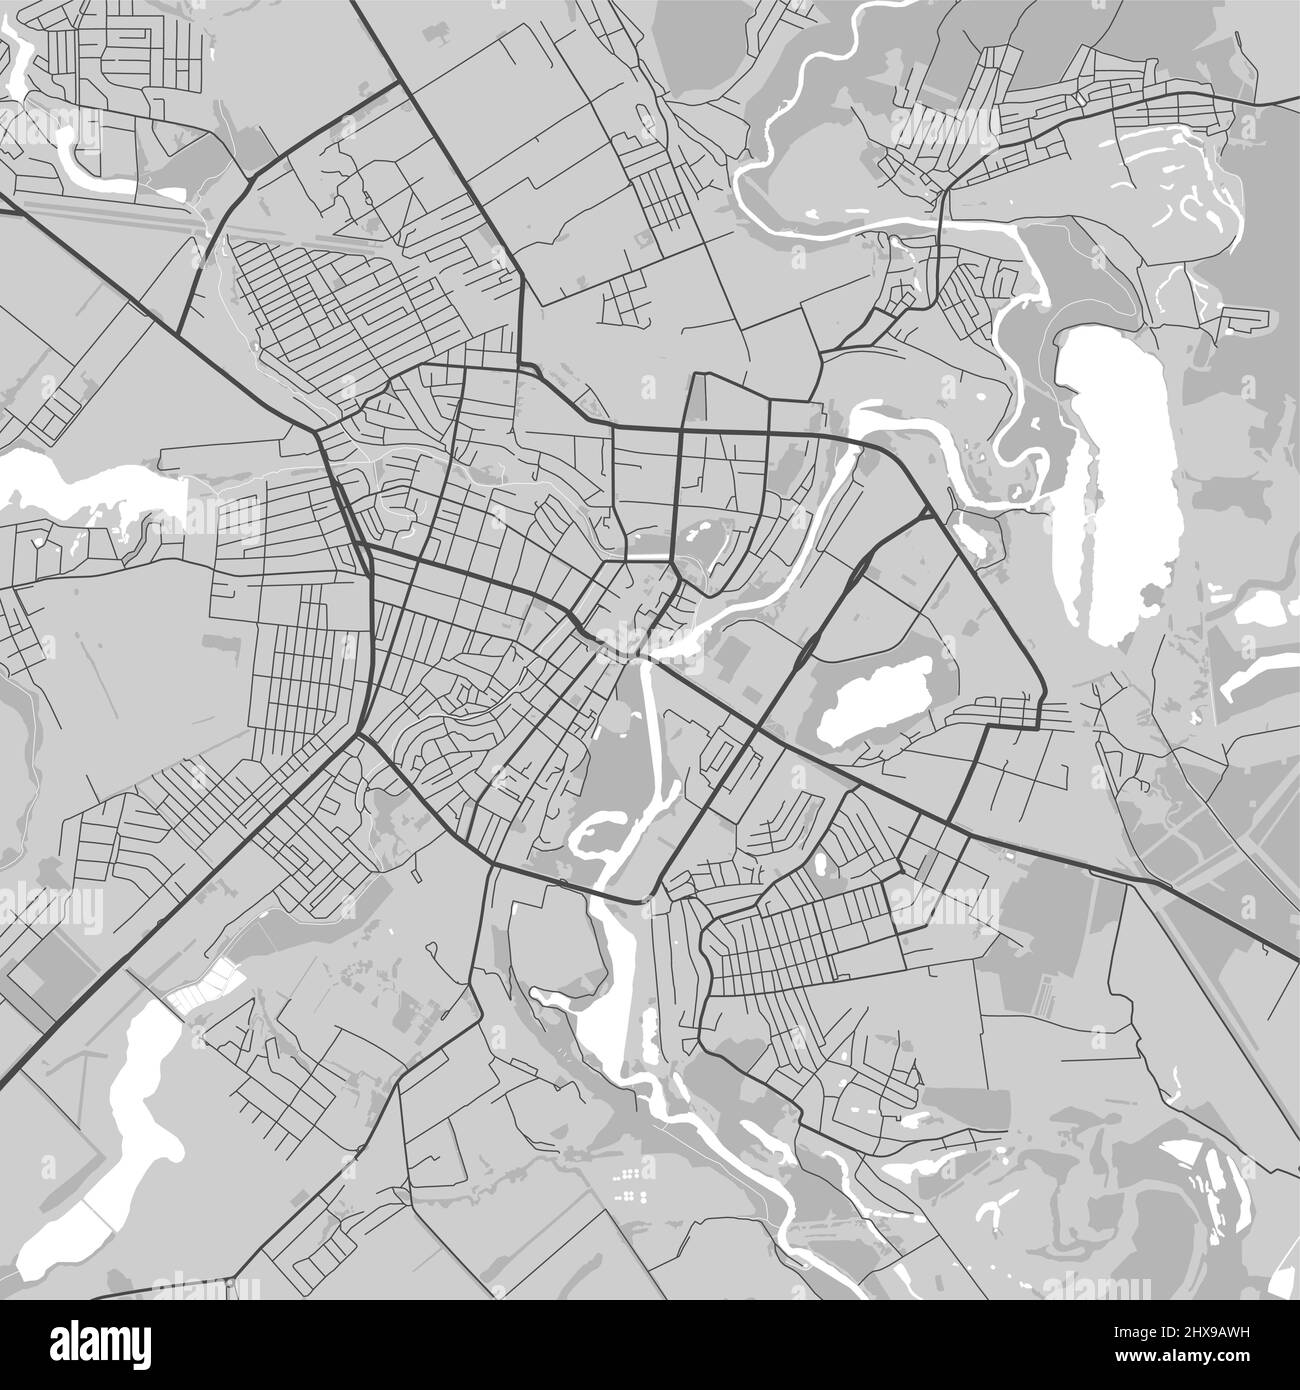 Vector map of Sumy city. Urban grayscale poster. Road map image with metropolitan city area view. Stock Vector